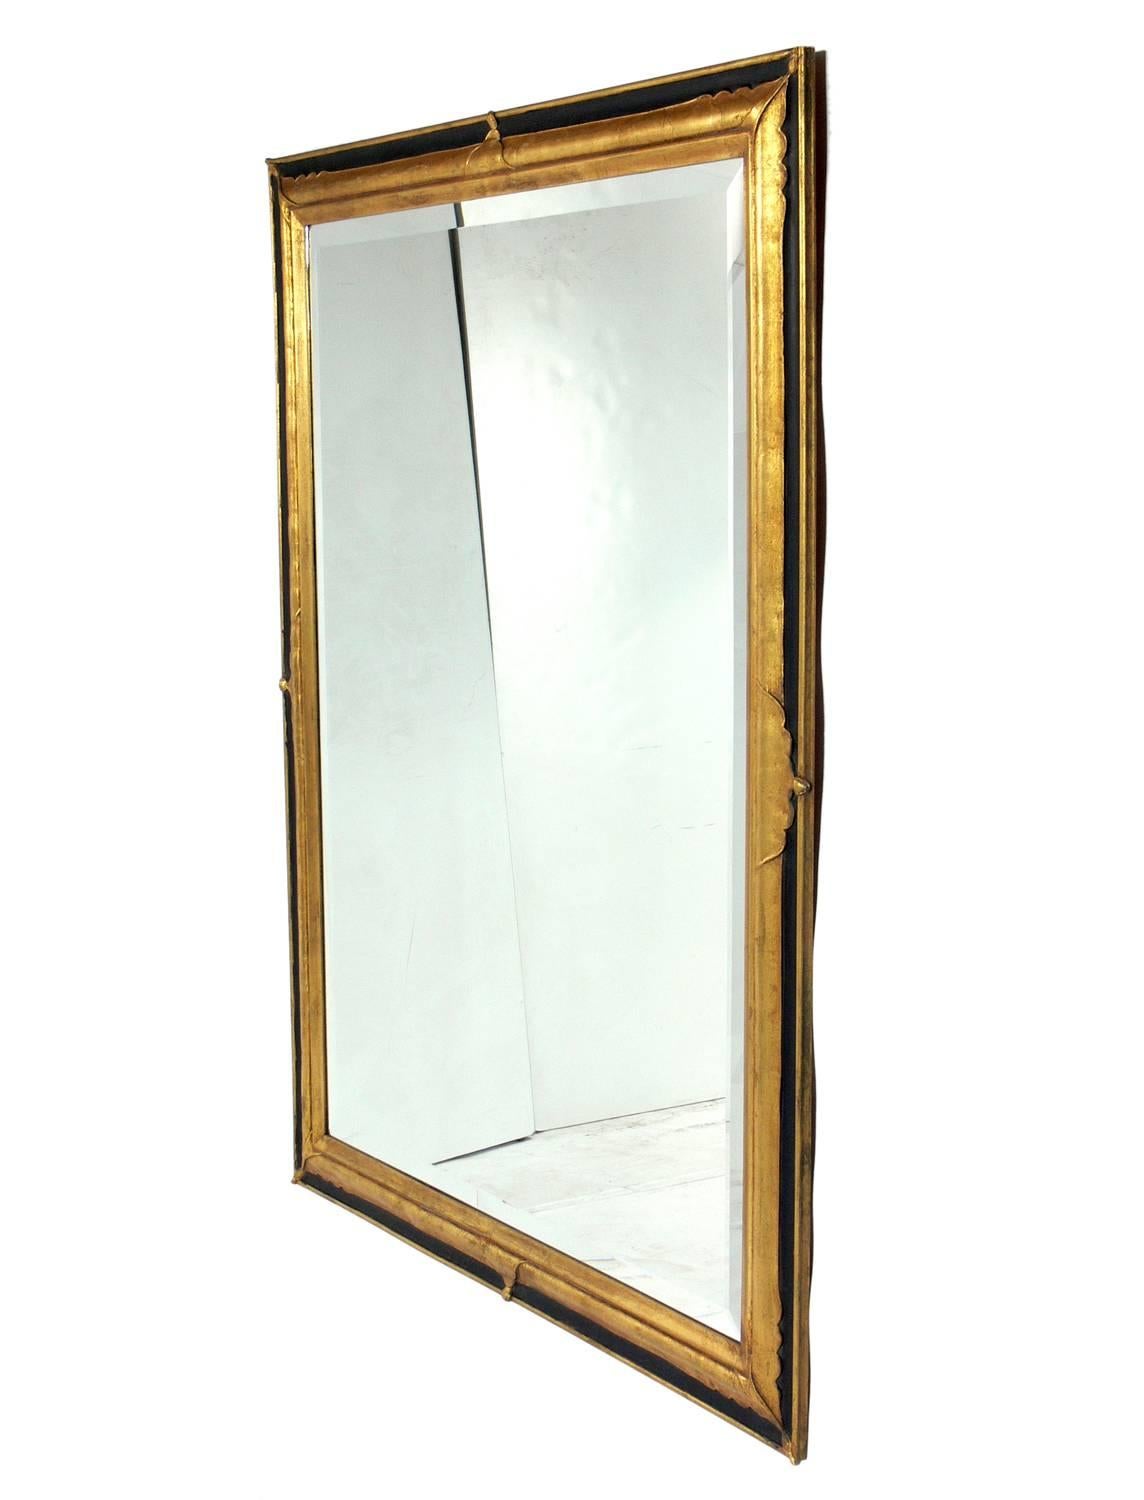 Elegant black and gilt mirror, American, circa 1940s. Retains warm original patina. This mirror can be hung vertically or horizontally, just let us know which you prefer.